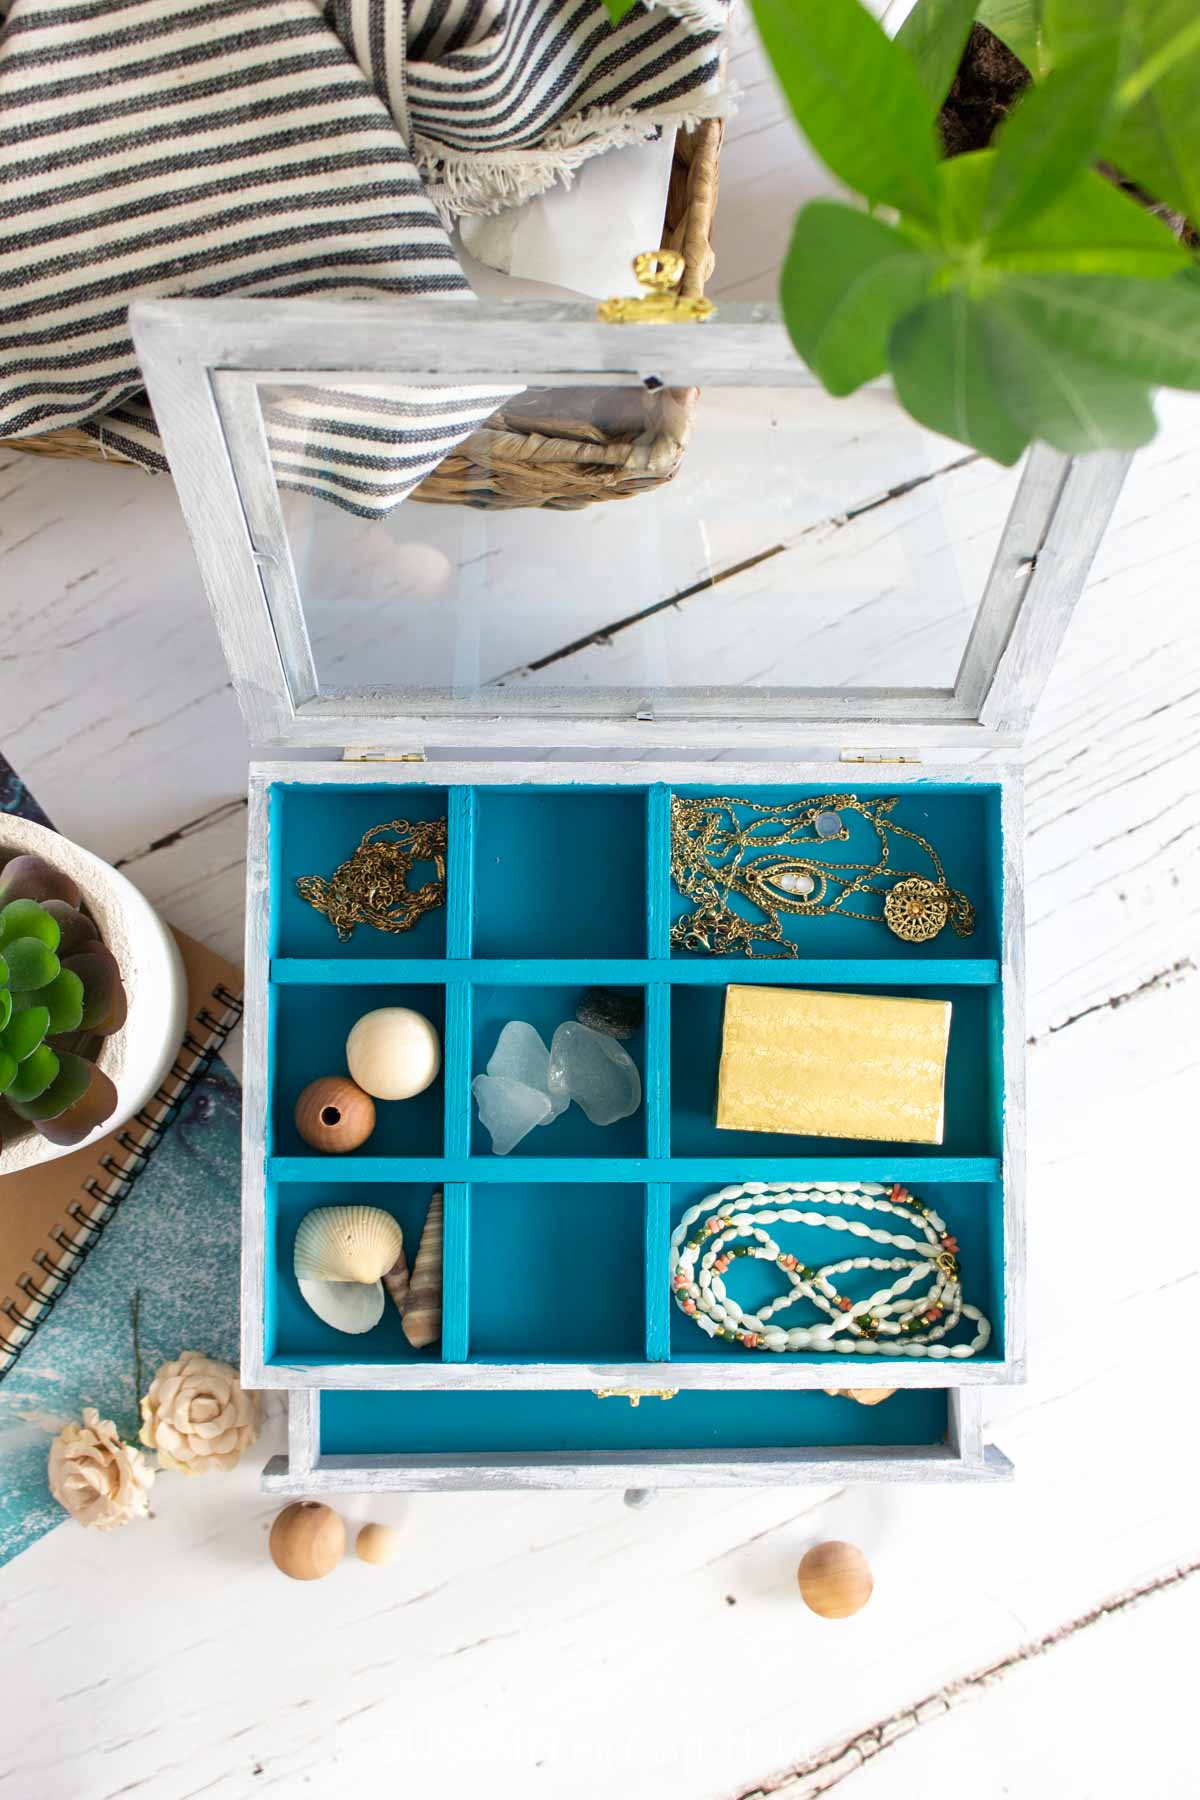 Overhead view of a hand painted jewelry box that's white washed on the outside and teal blue on the inside, filled with jewelry and trinkets.